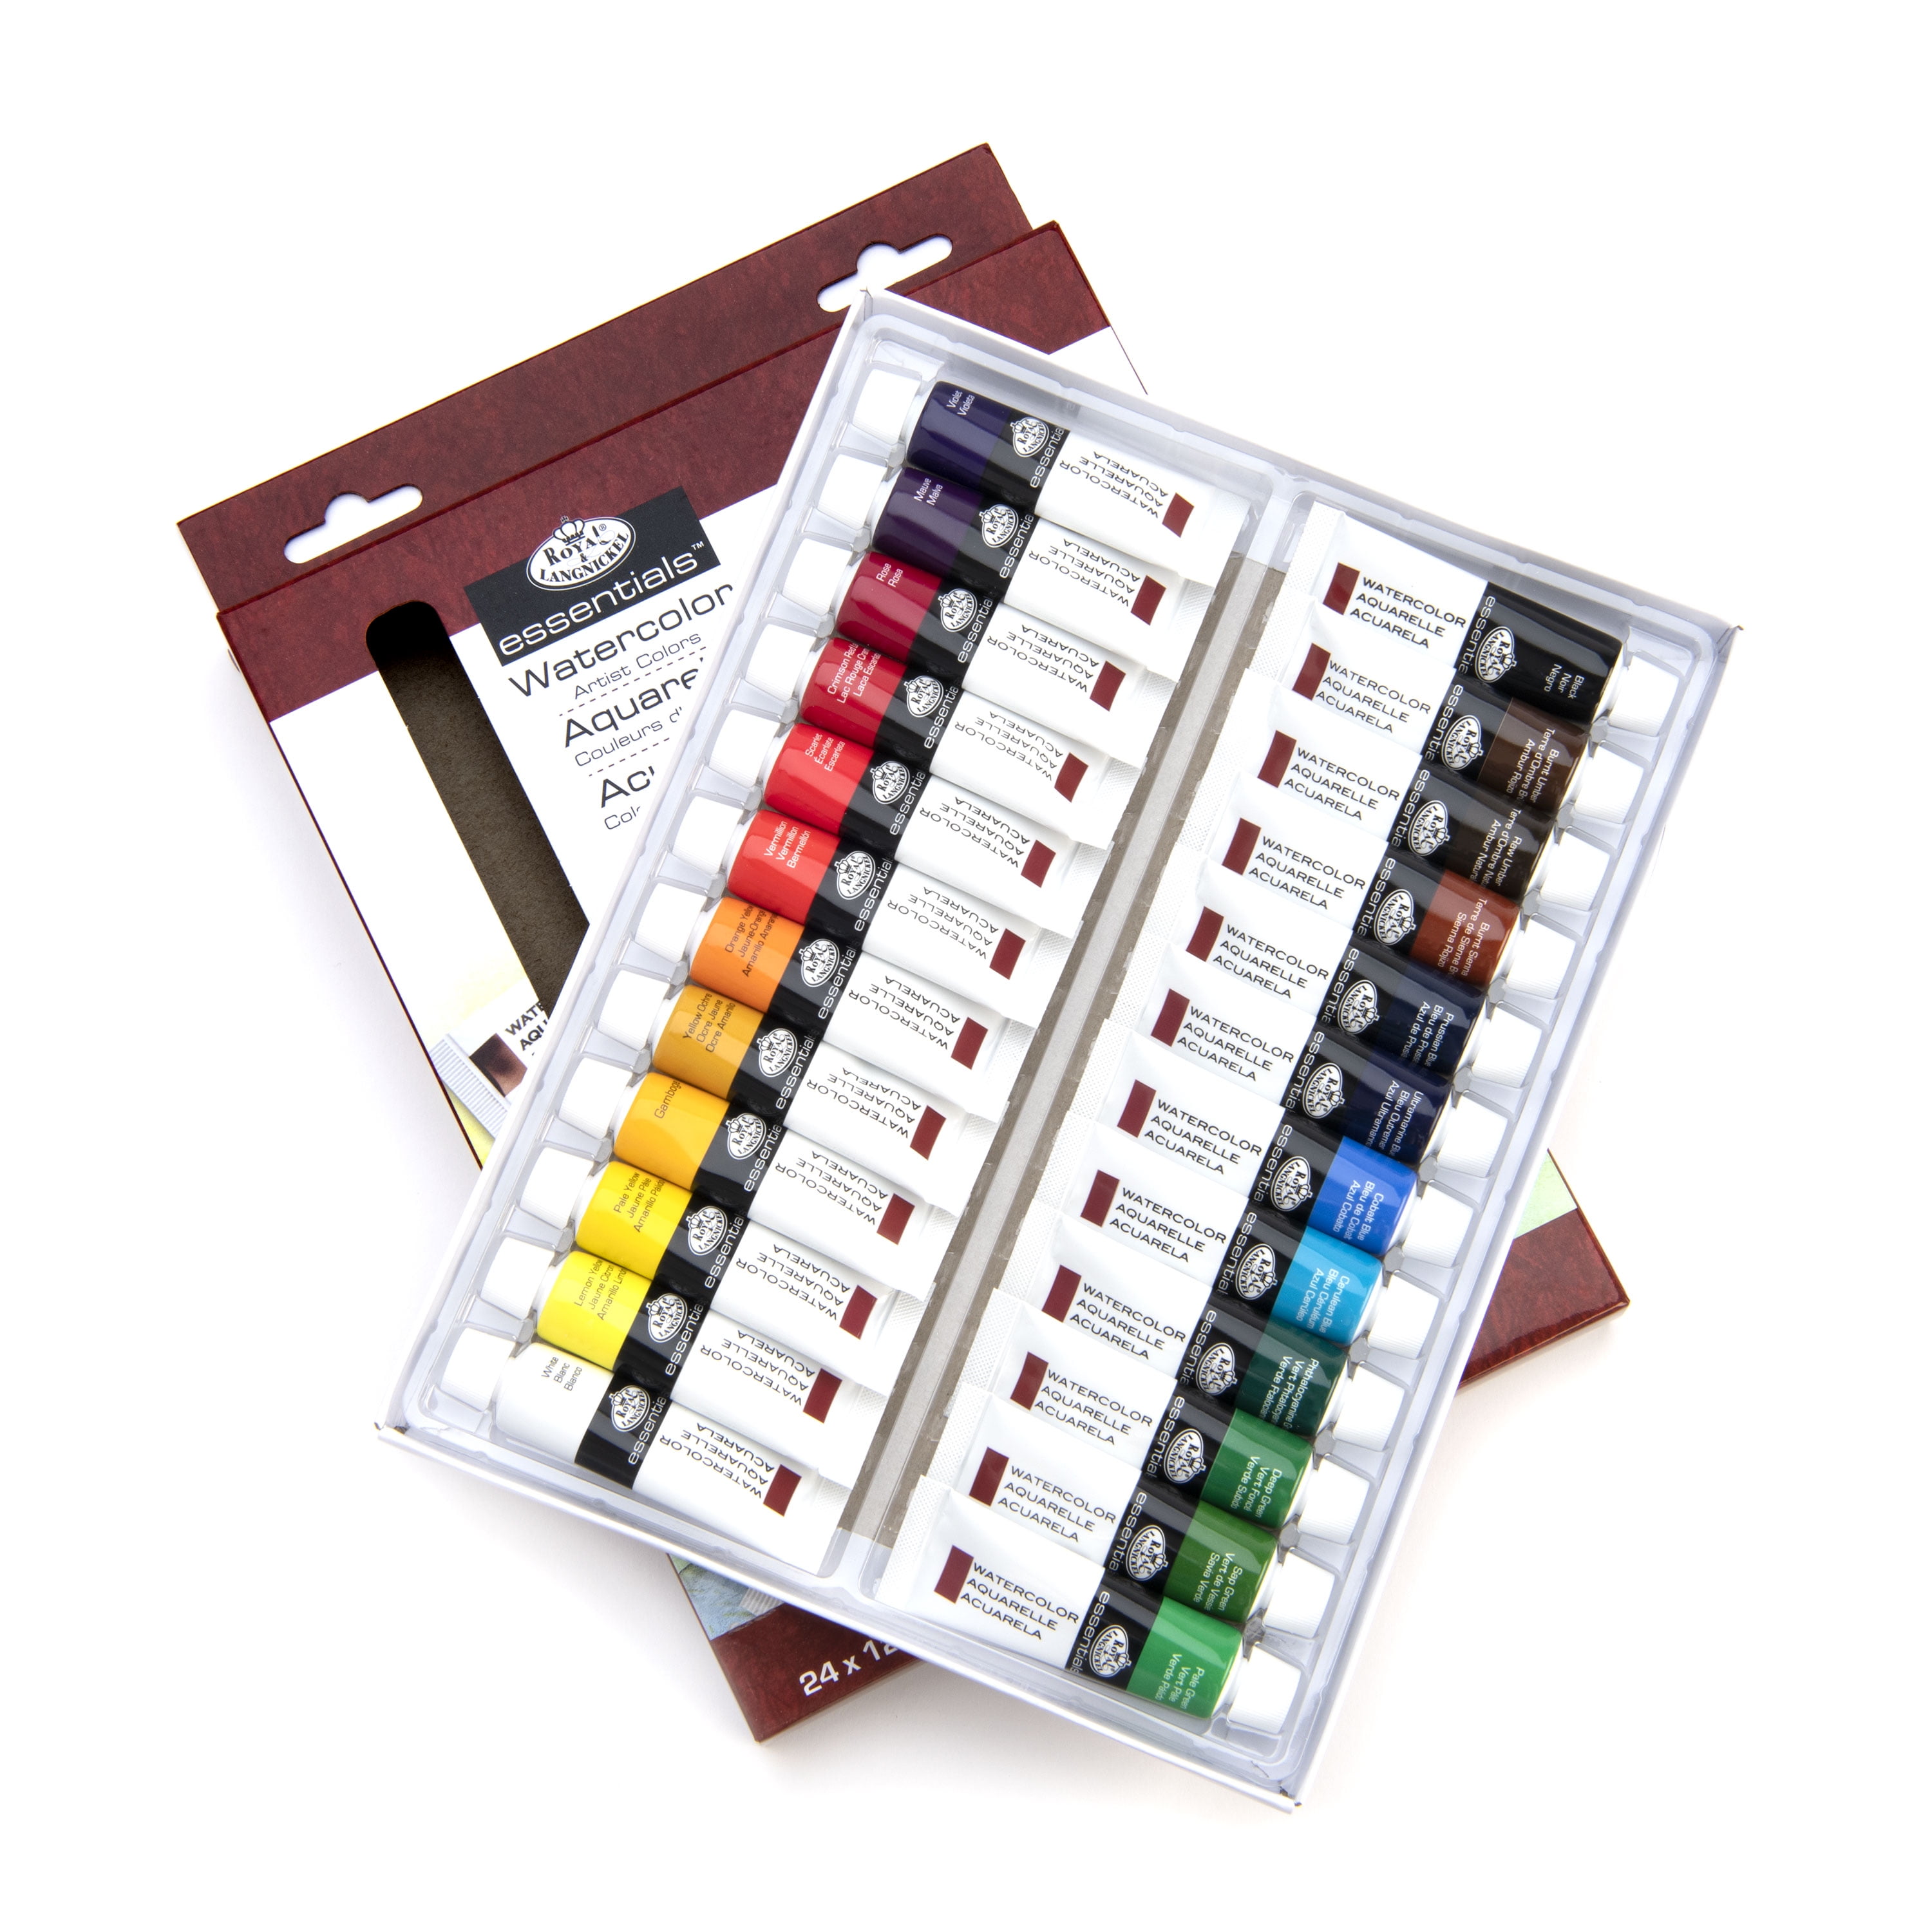 Watercolor Painting Kit Variety Pack 